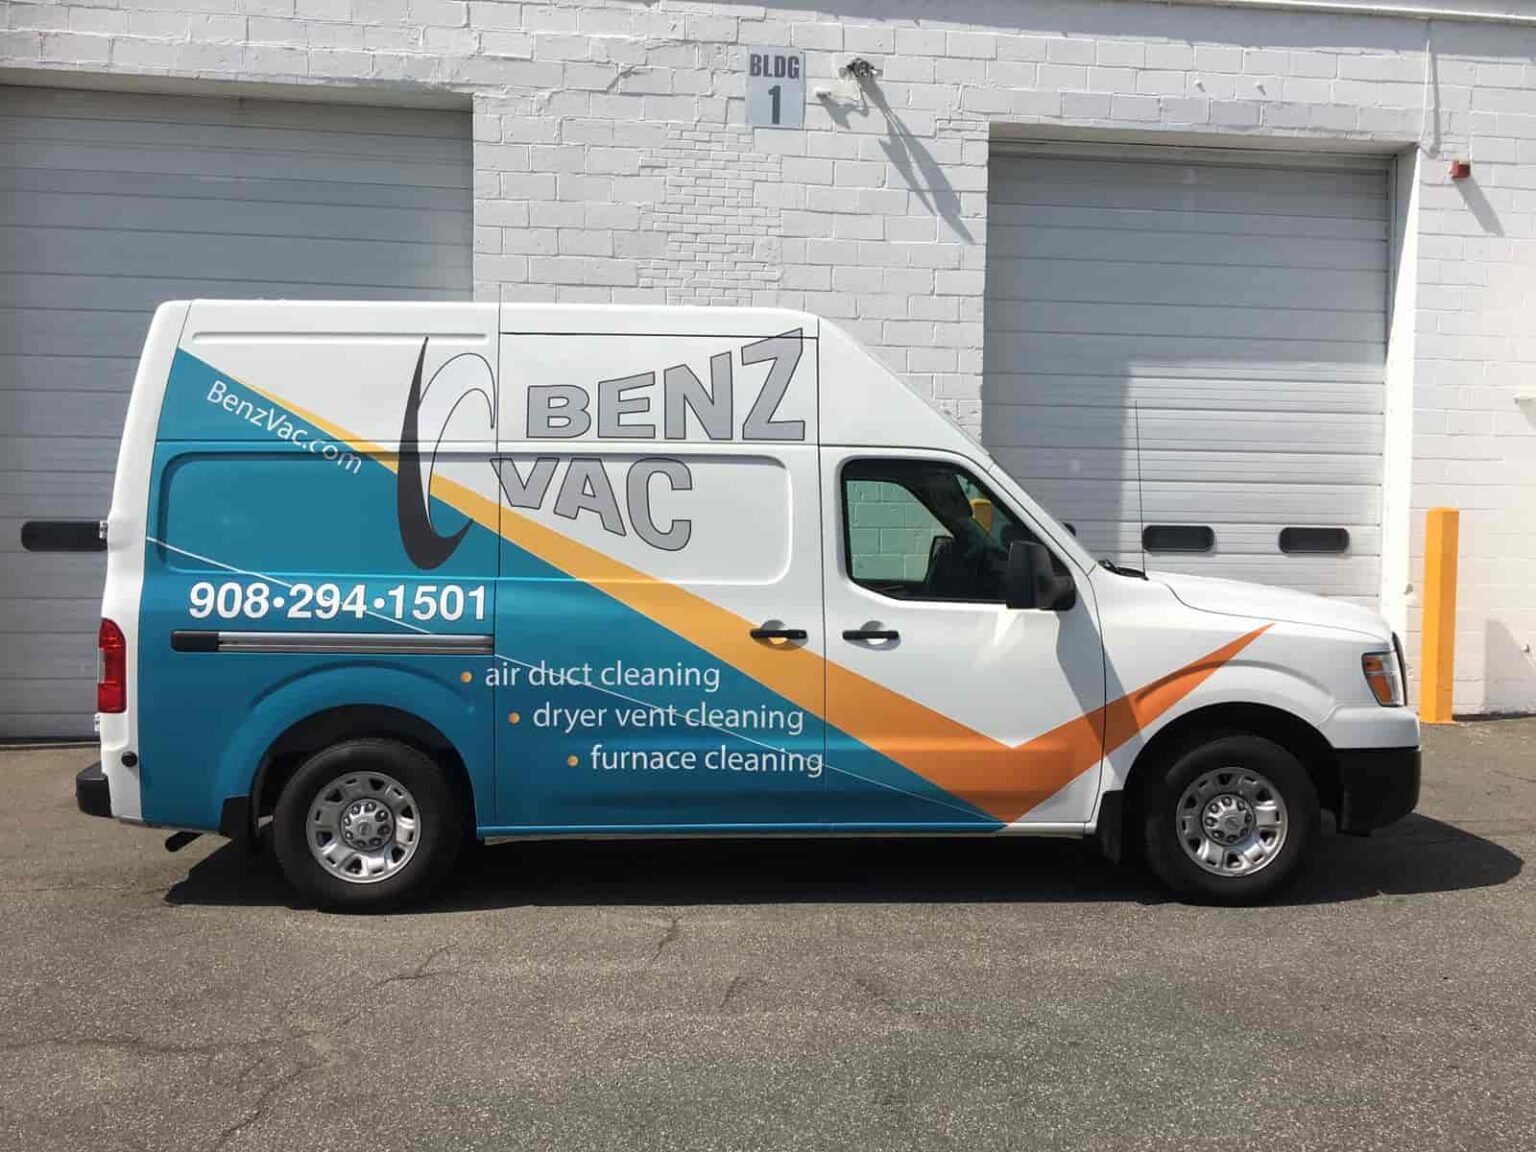 Water Damage Clean-up Furnace Cleaning Bergen County dryer vent cleaning new jersey Commercial Air Duct Cleaning Paramus Furnace Cleaning Service Chimney Cleaning NJ services Water Damage Restoration Boonton | Best #1 BenzVac 07005 Prevent Kids Allergies Dryer Vent Cleaning Bergen County Sanitizing Service Emerson NJ Water Damage Clean Up Boonton